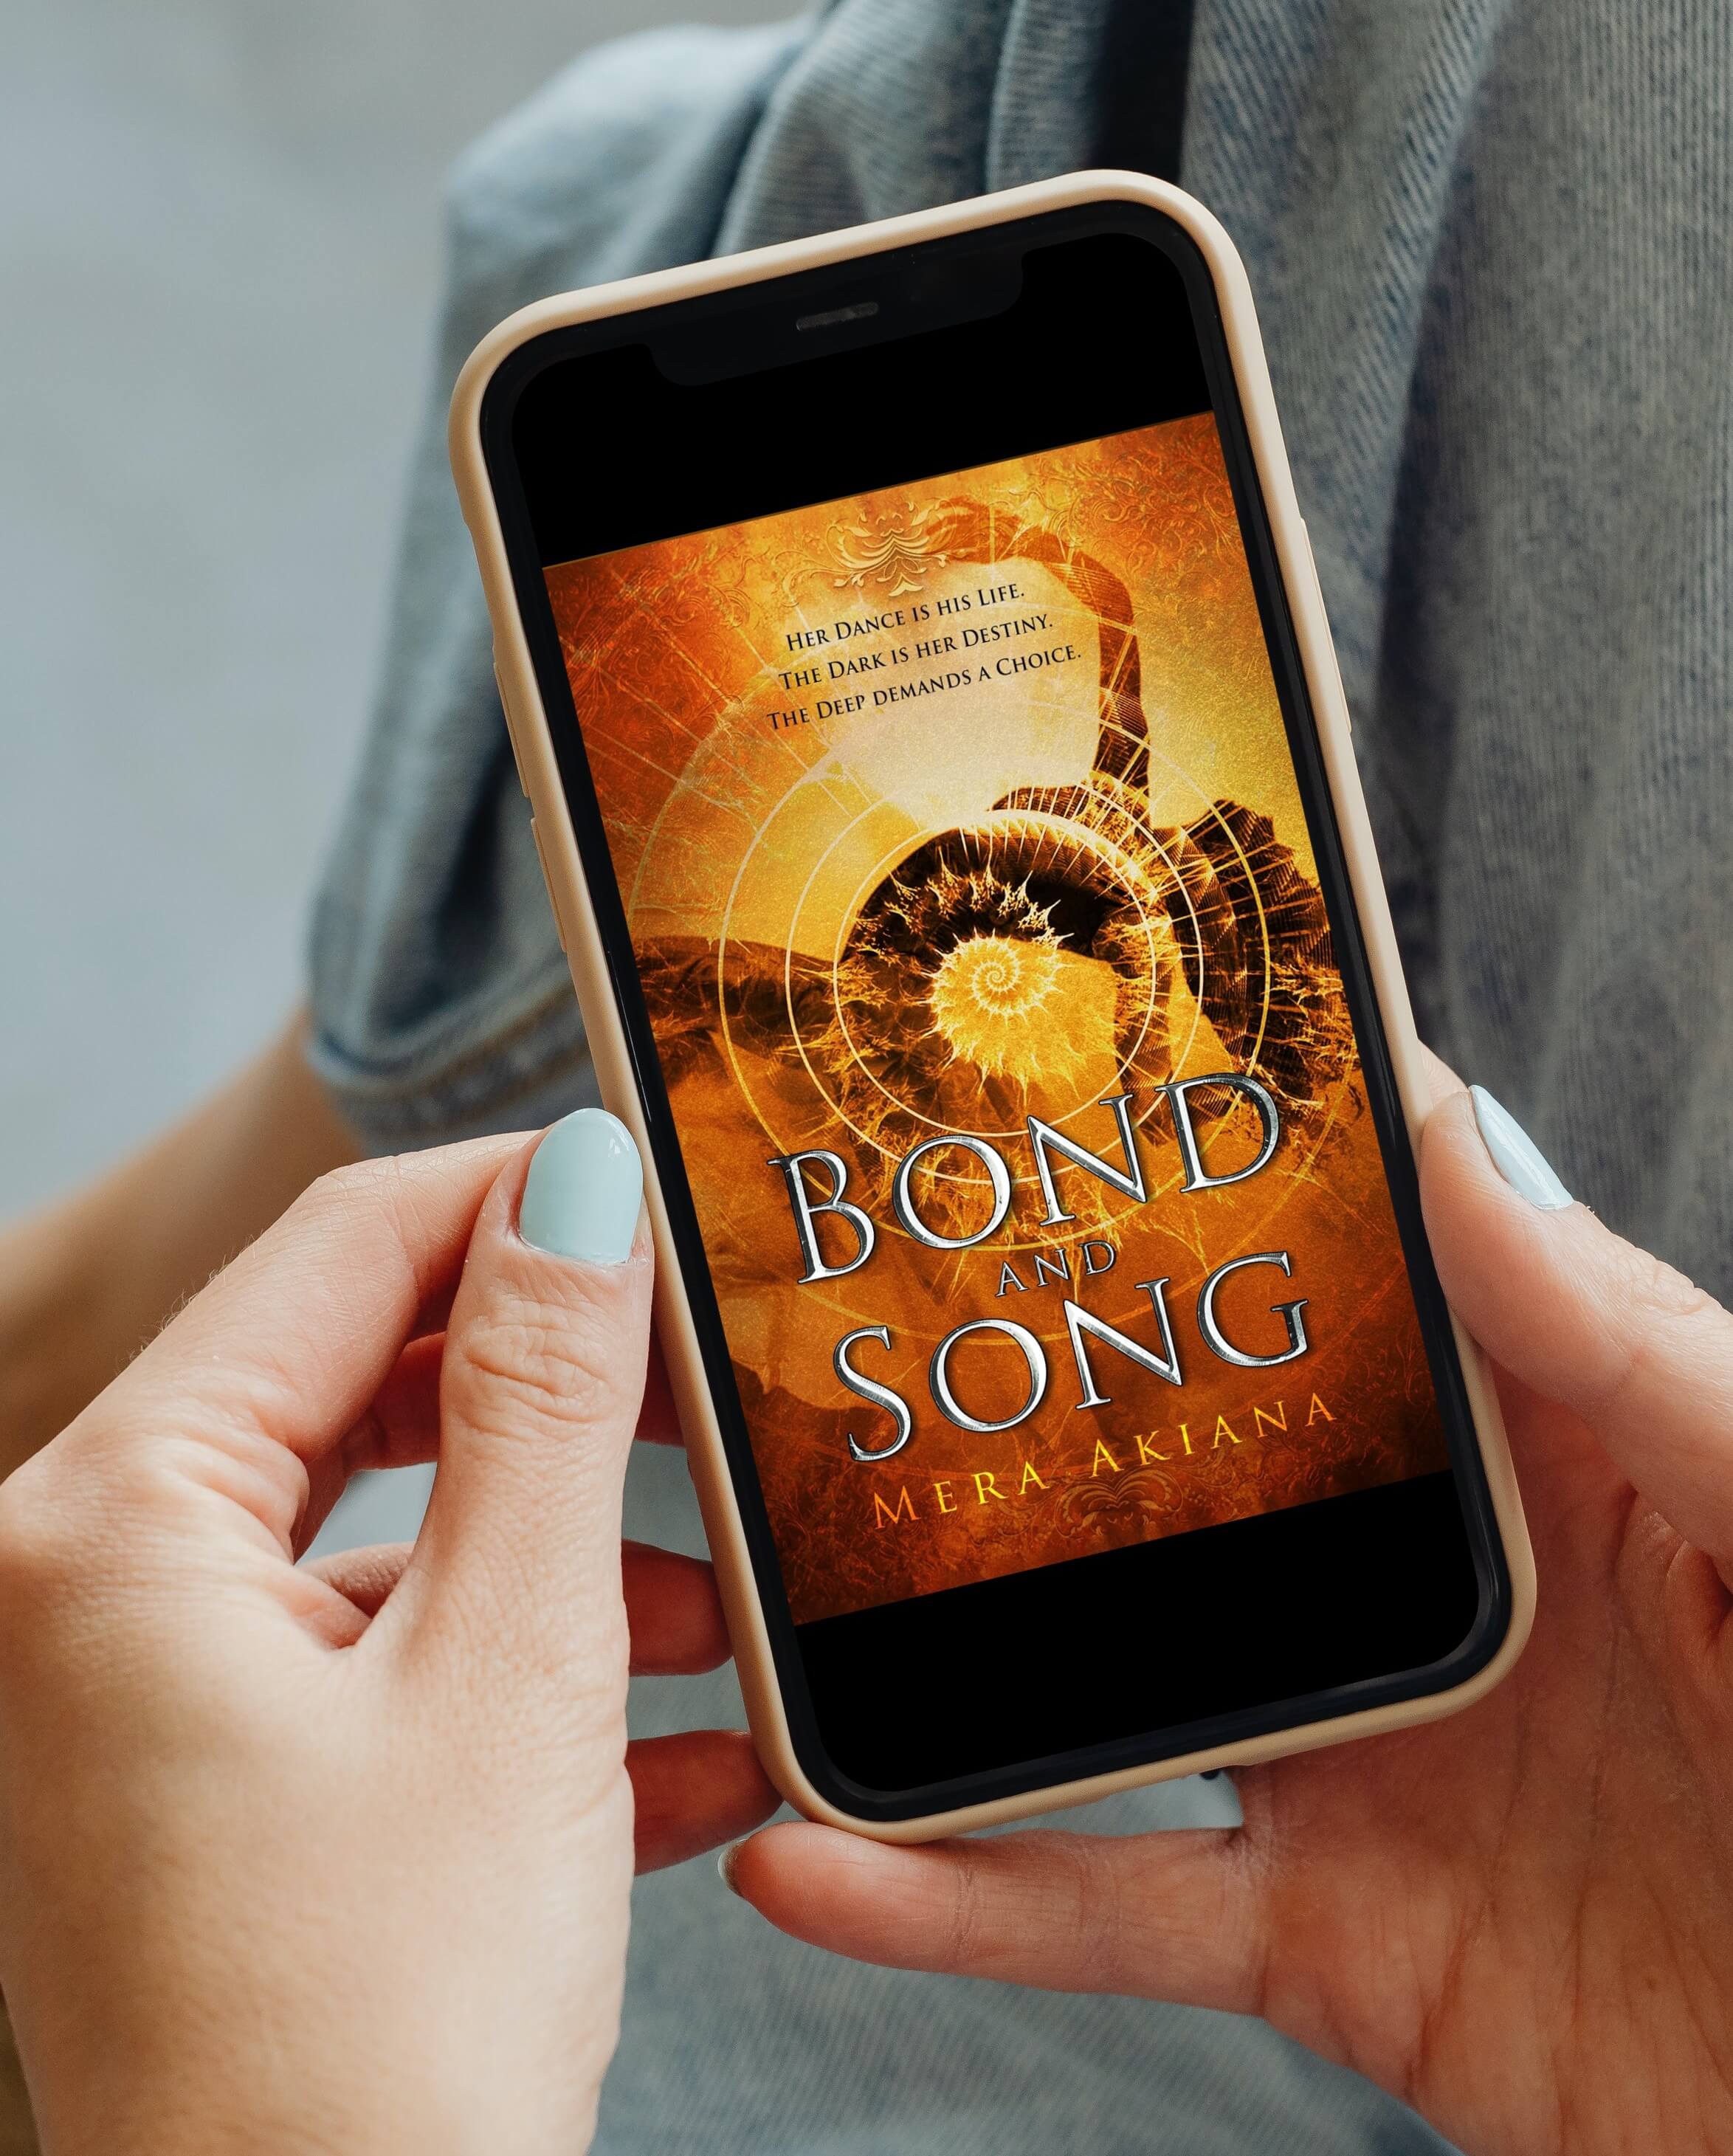 novel Bond and Song as ebook on phone